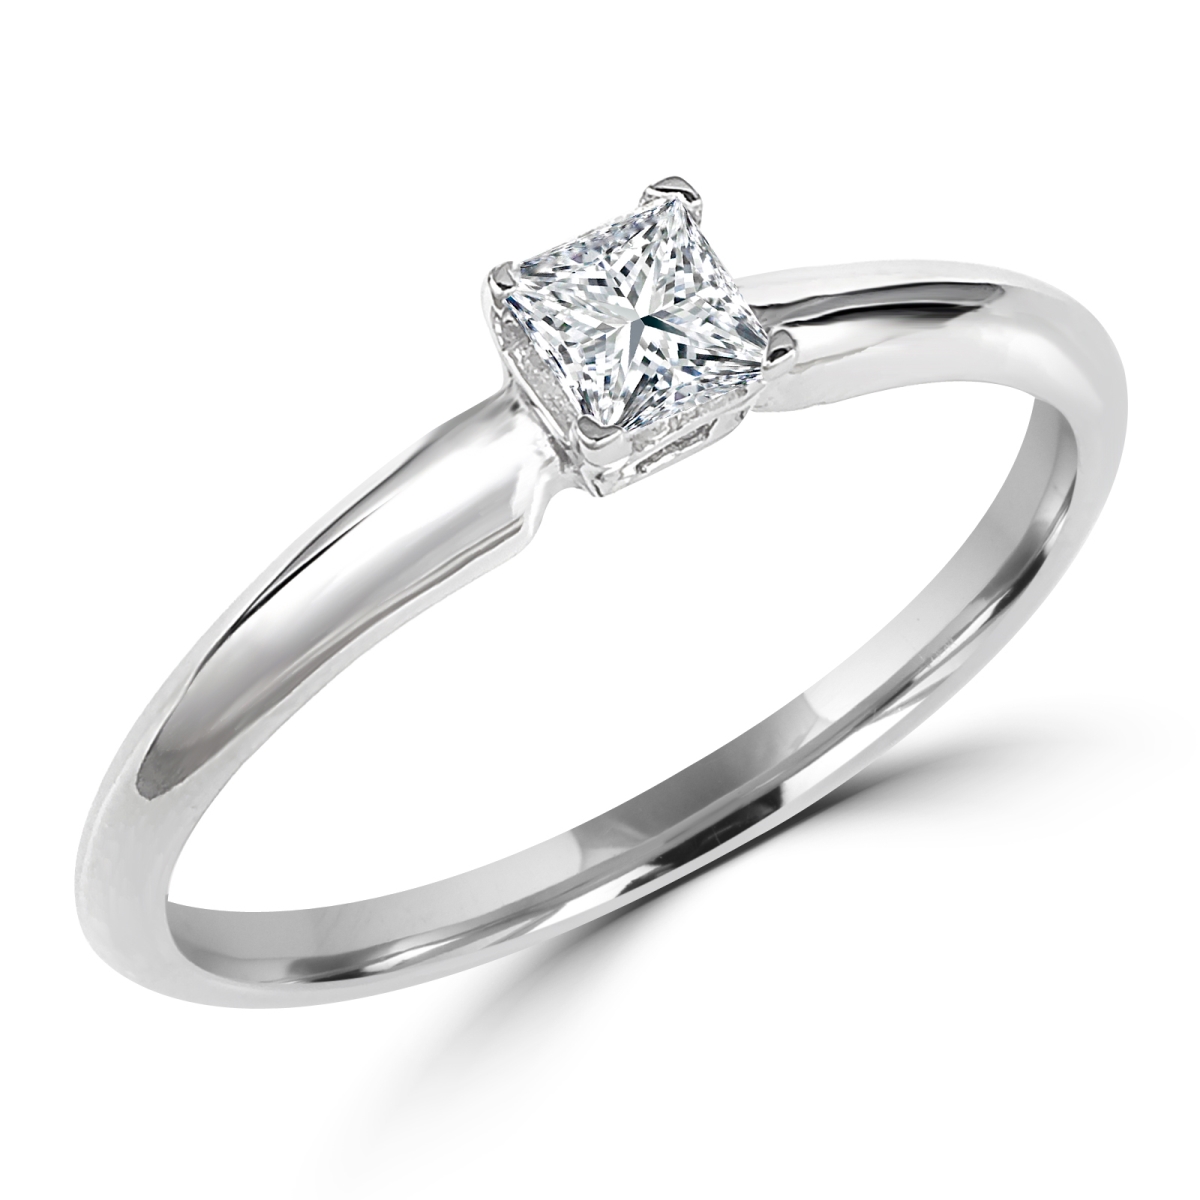 Picture of Majesty Diamonds MD170172-8 0.16 CT Princess Diamond Solitaire Engagement Ring in 10K White Gold - 8